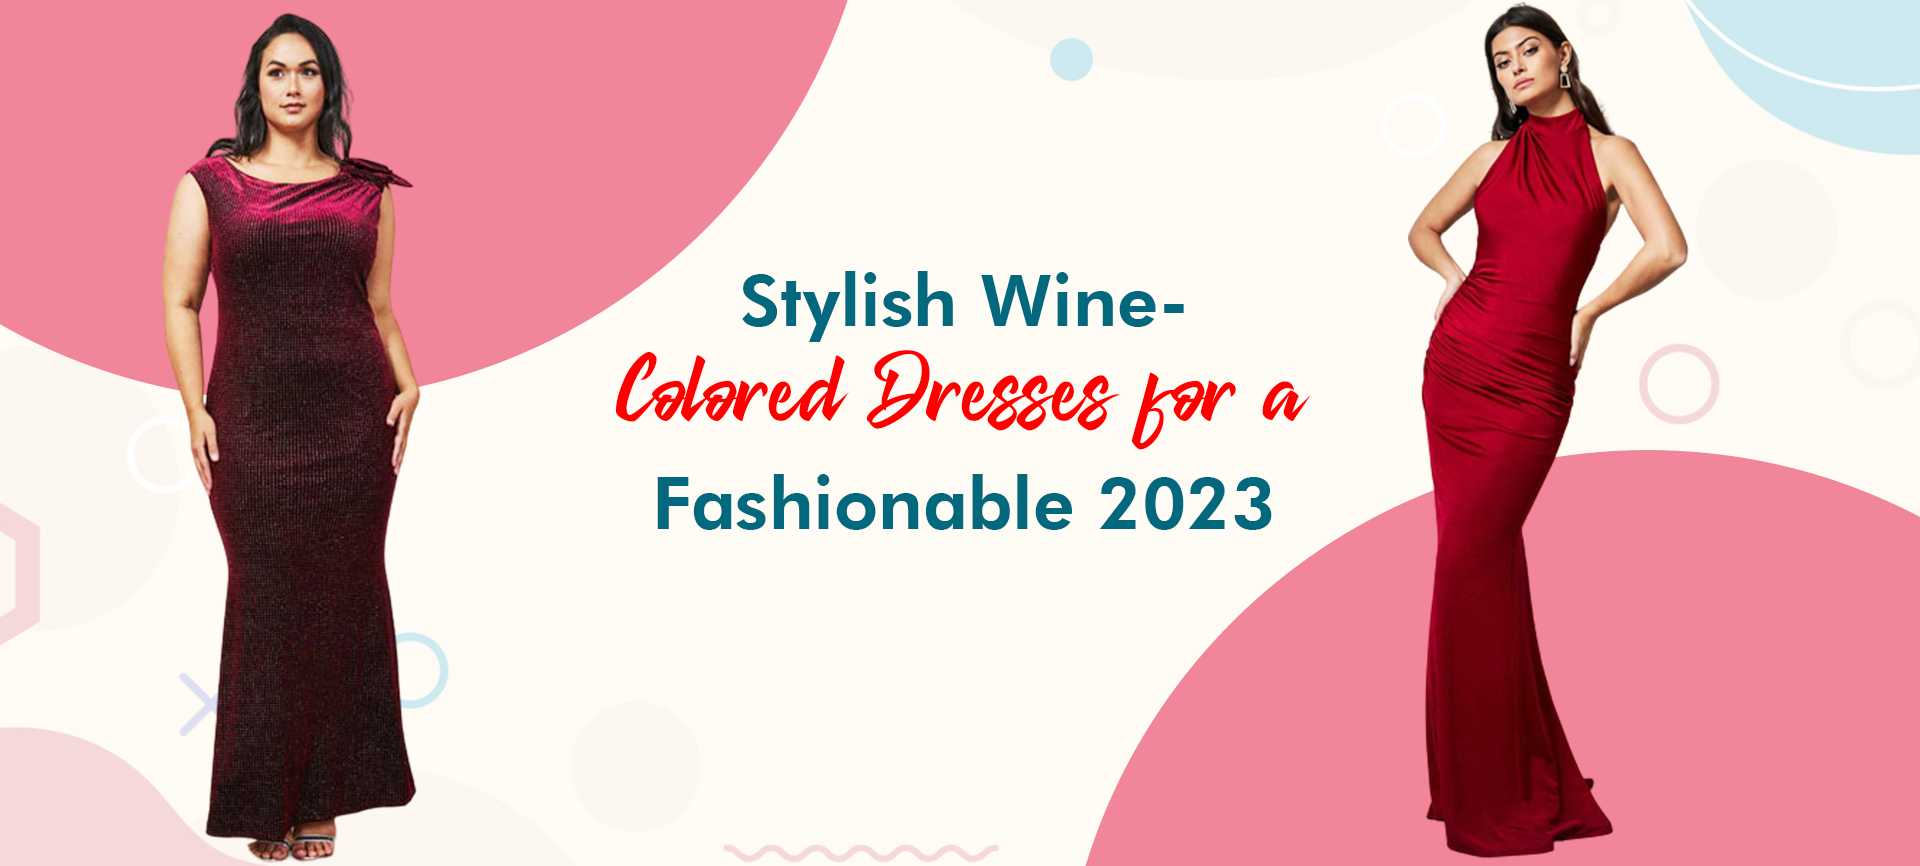 Stylish Wine-Colored Dresses for a Fashionable 2023